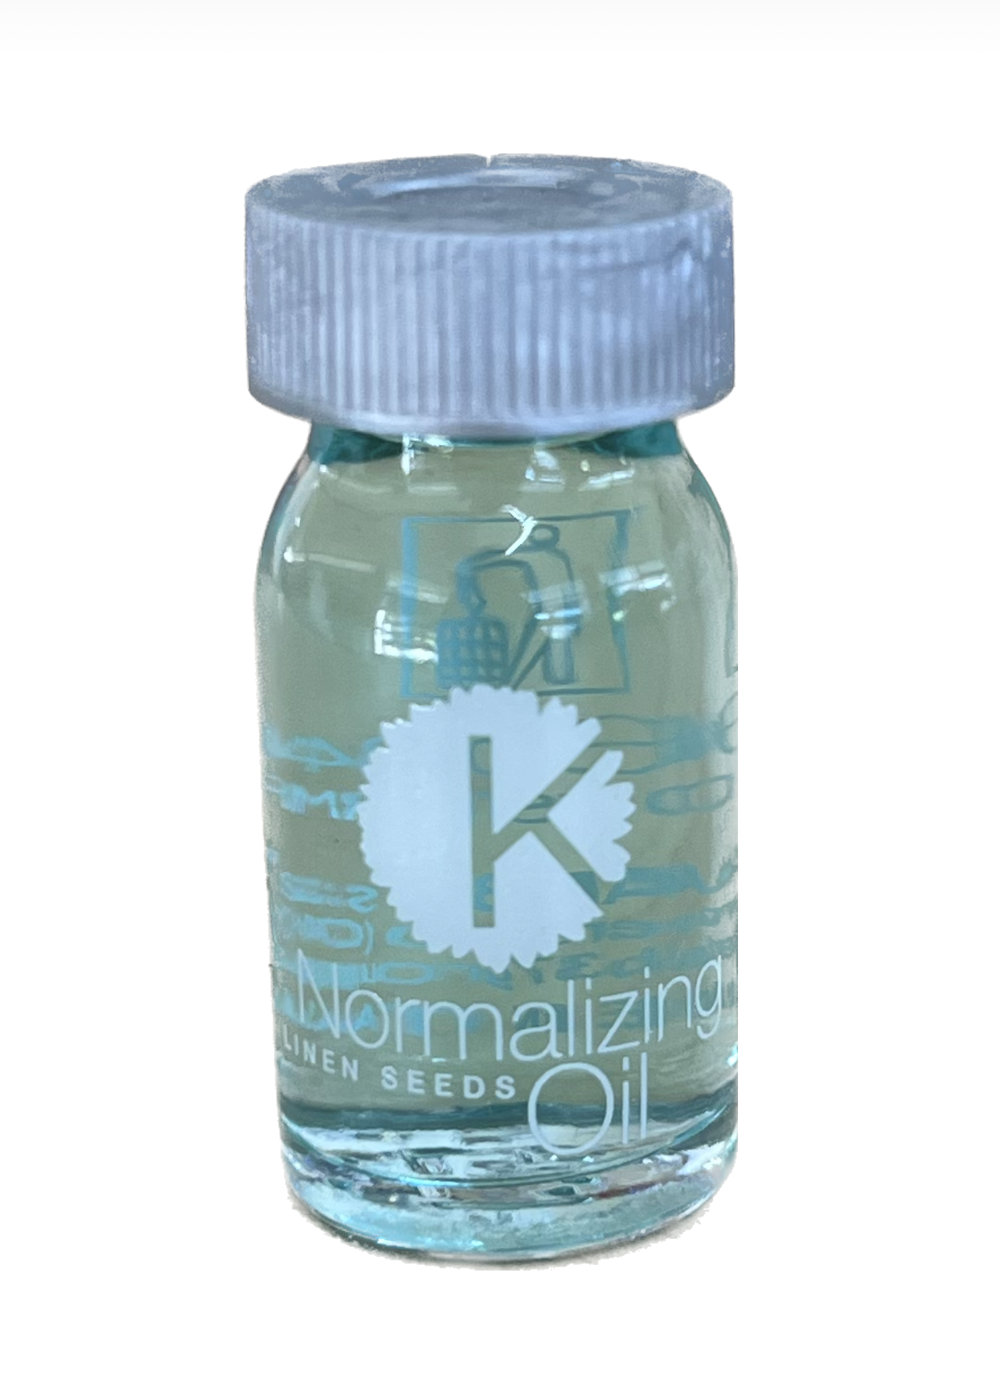 Kristal Basic normalizing oil ampoule (individual)